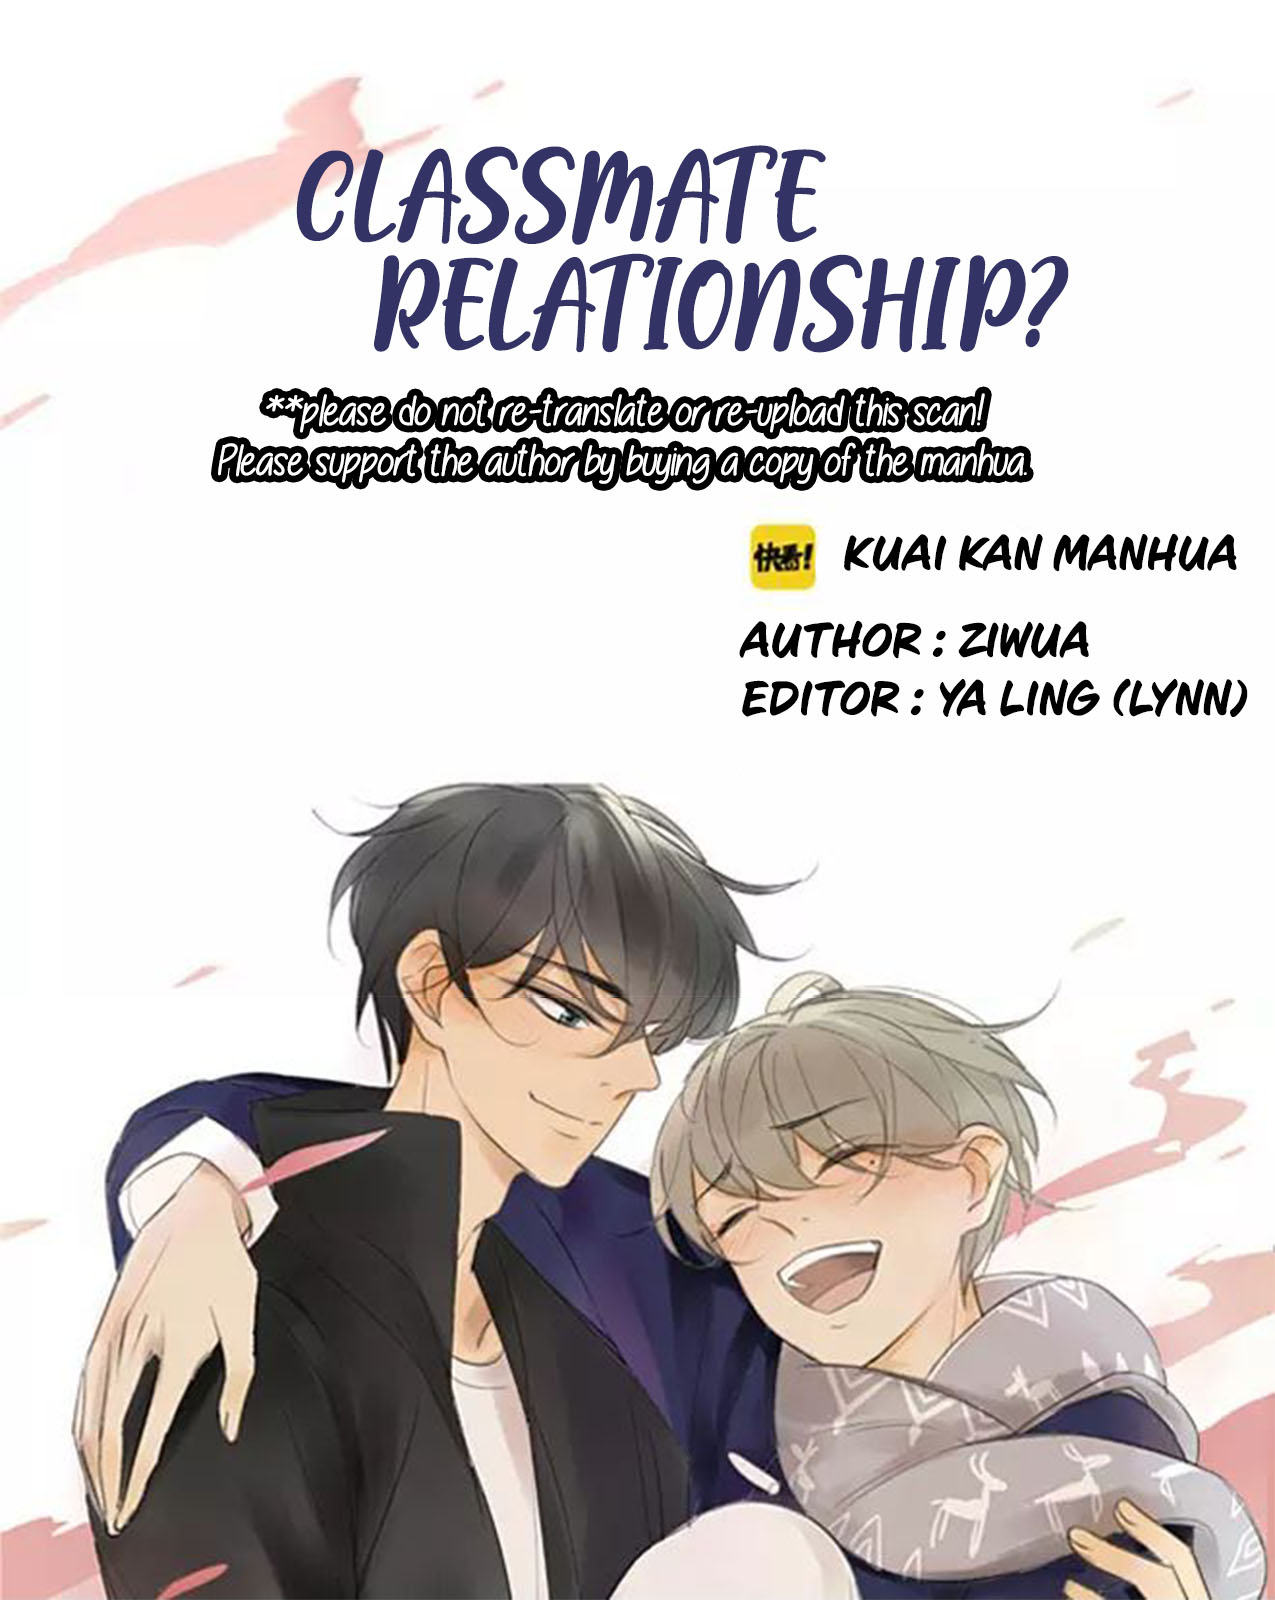 Classmate Relationship? Ch. 18 Ah Shu's also staying at Senior's house?